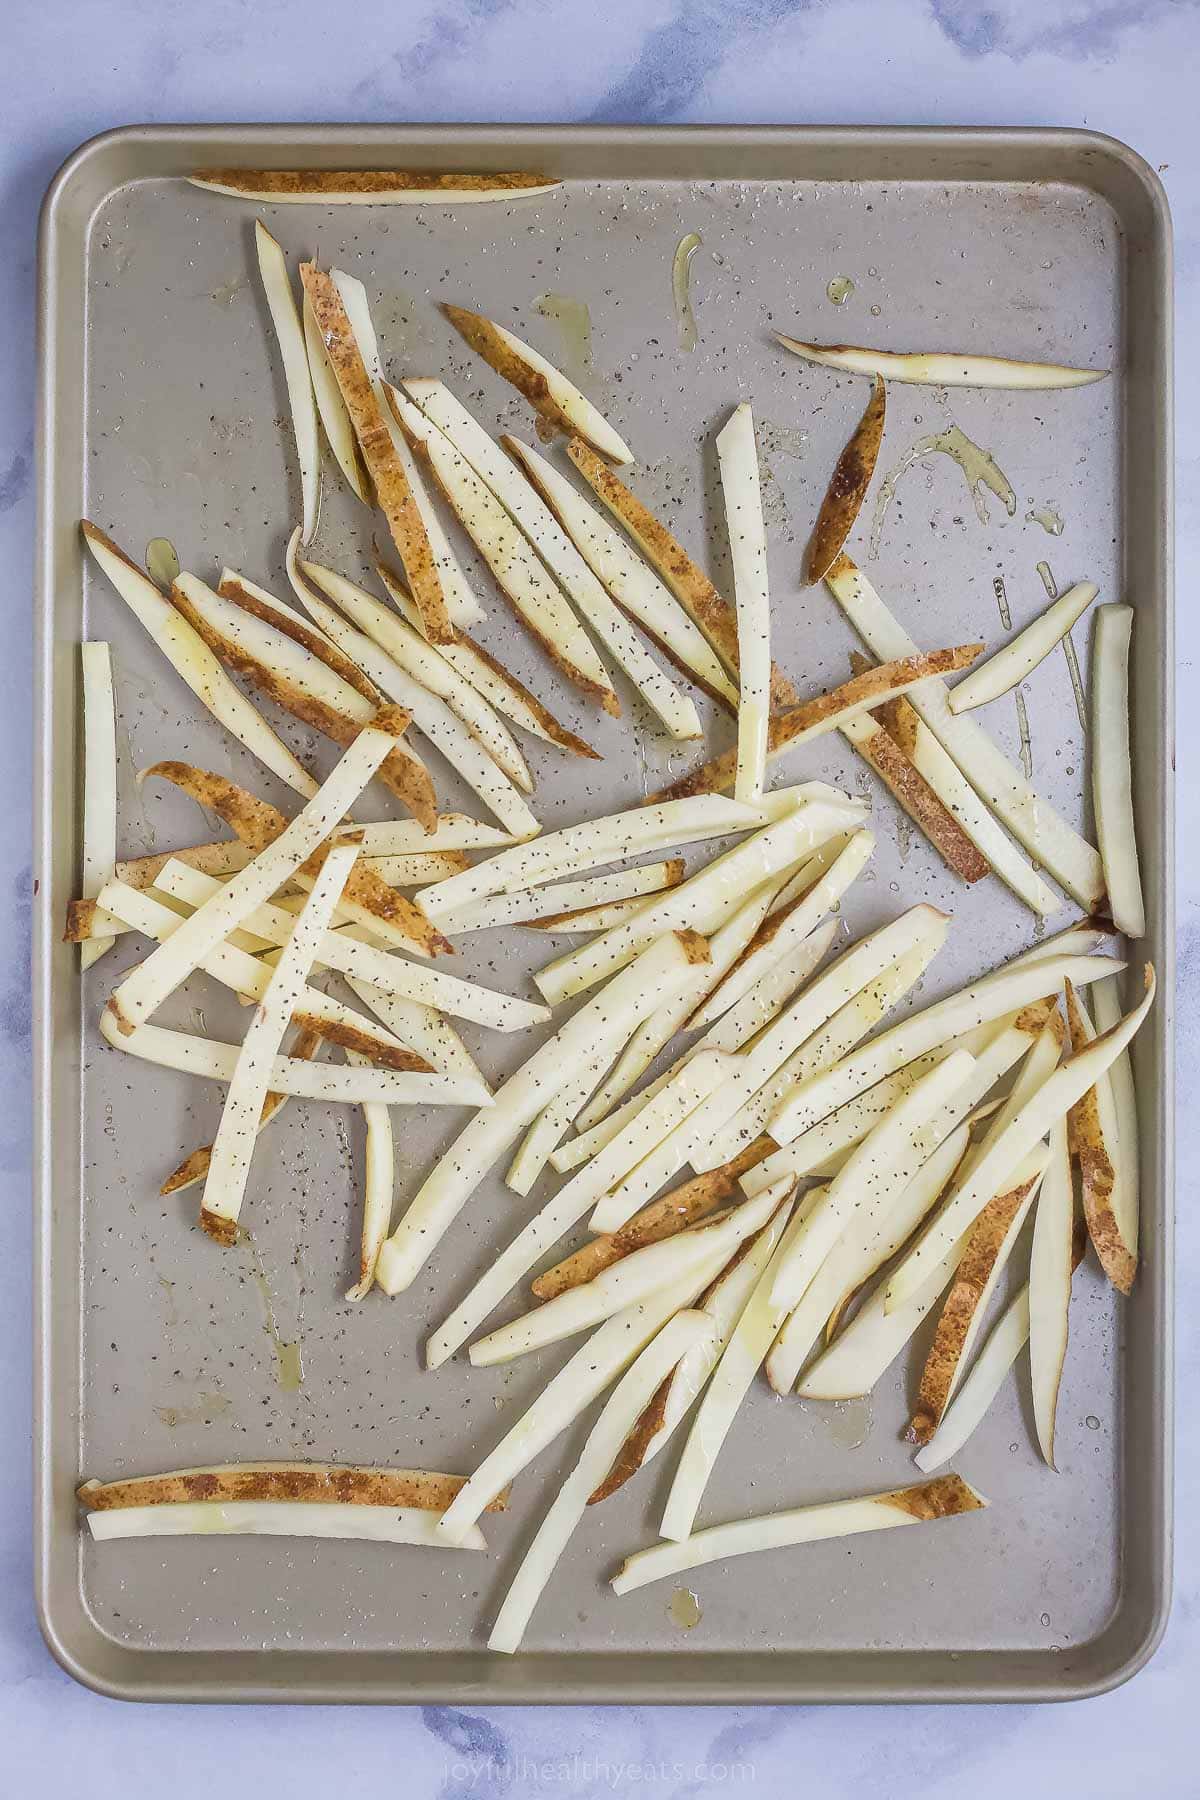 Tossing the fries in olive oil, salt, and pepper. 